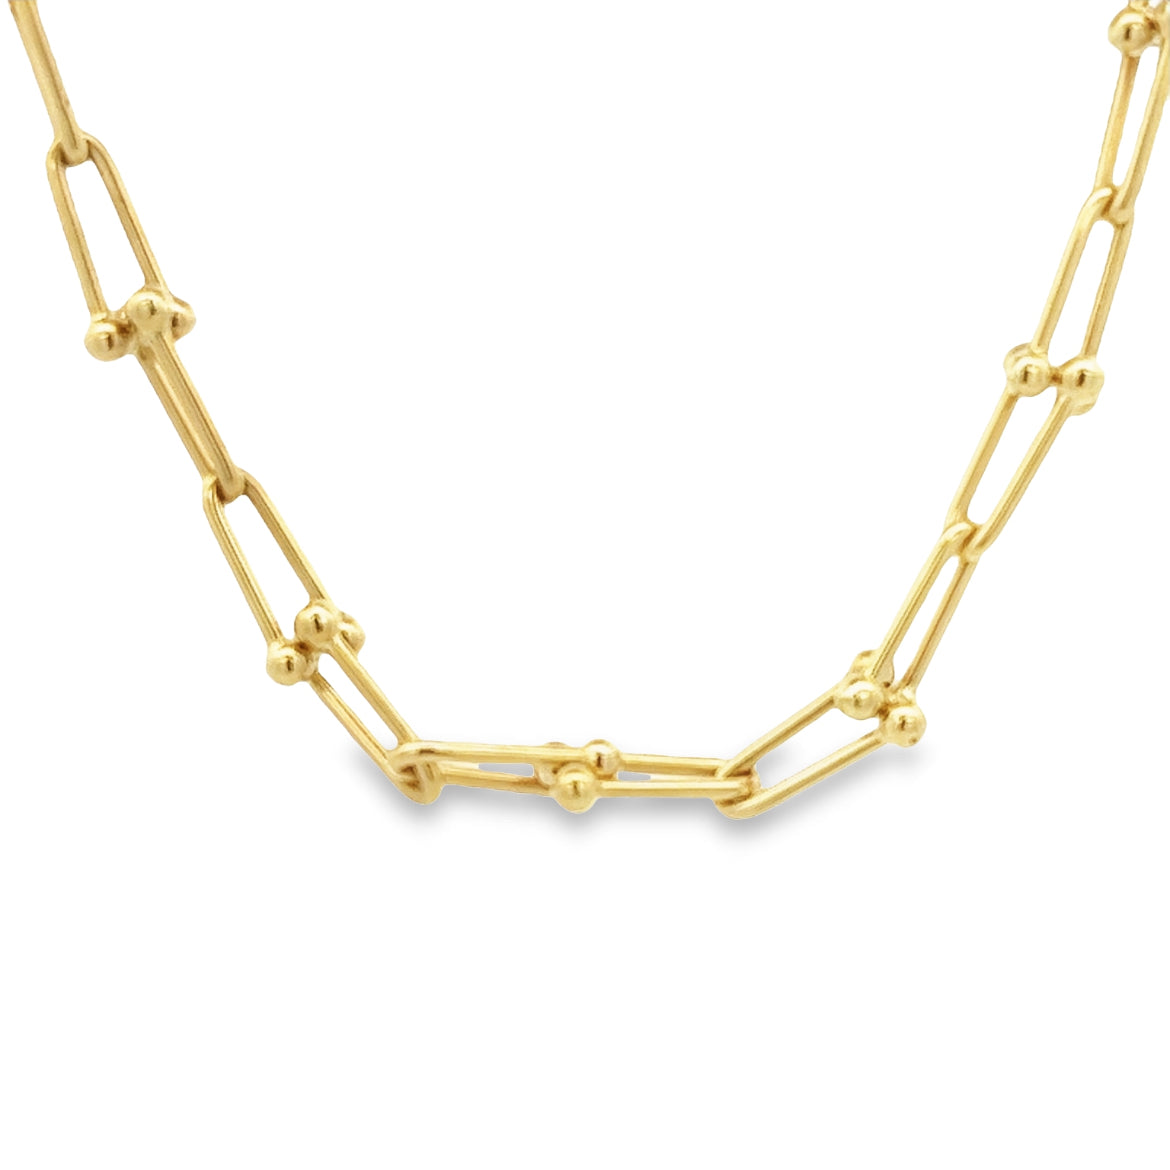 14K GOLD DOT LINK CHAIN NECKLACE